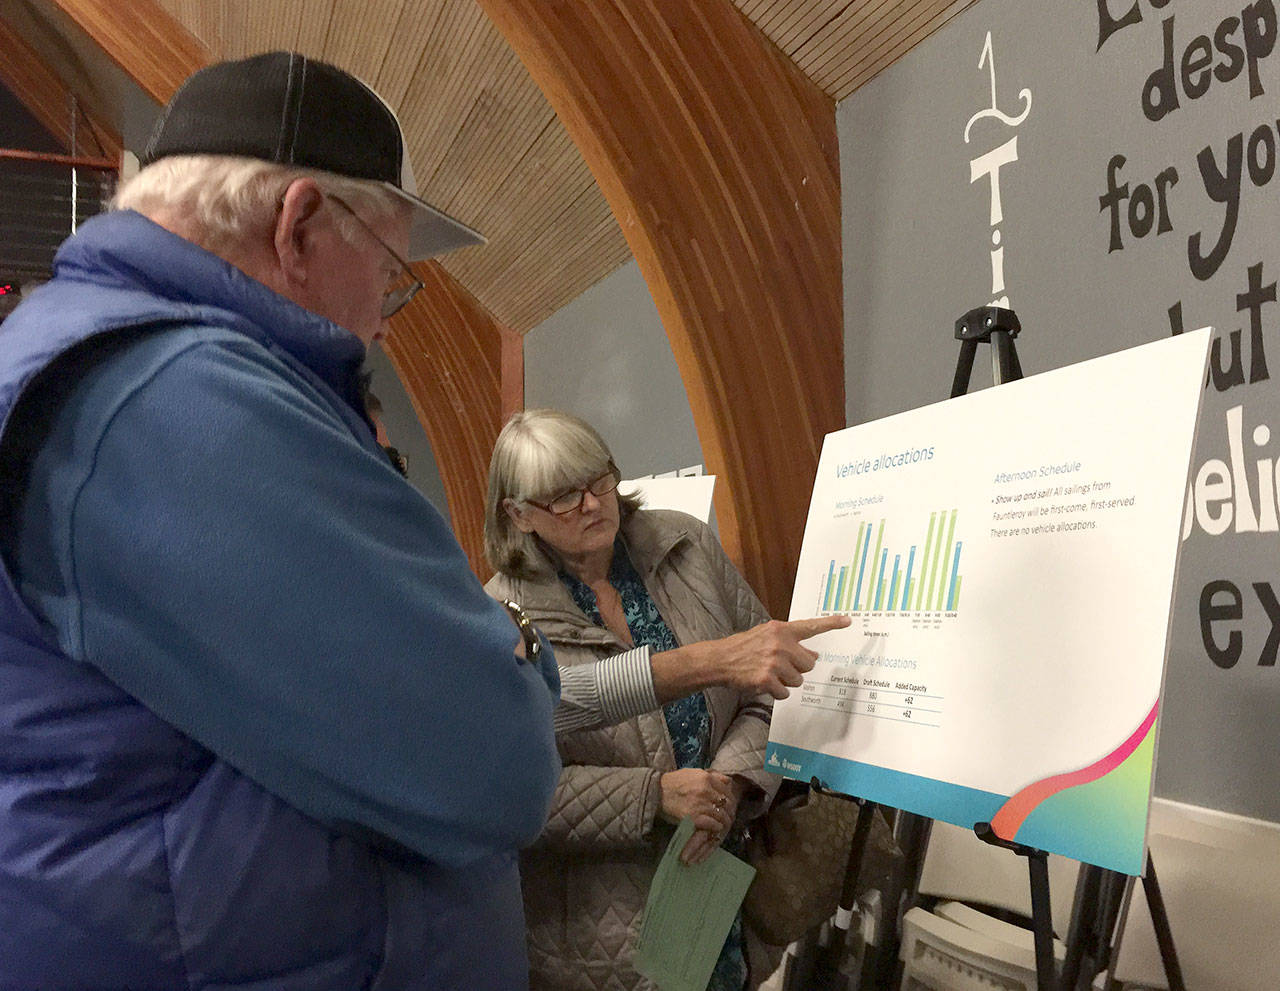 A capacity crowd reviews Washington State Ferries charts detailing a revised sailing schedule for the Triangle sailings among the Southworth, Vashon and Fauntleroy ferry terminals. (Bob Smith | Kitsap Daily News photo)